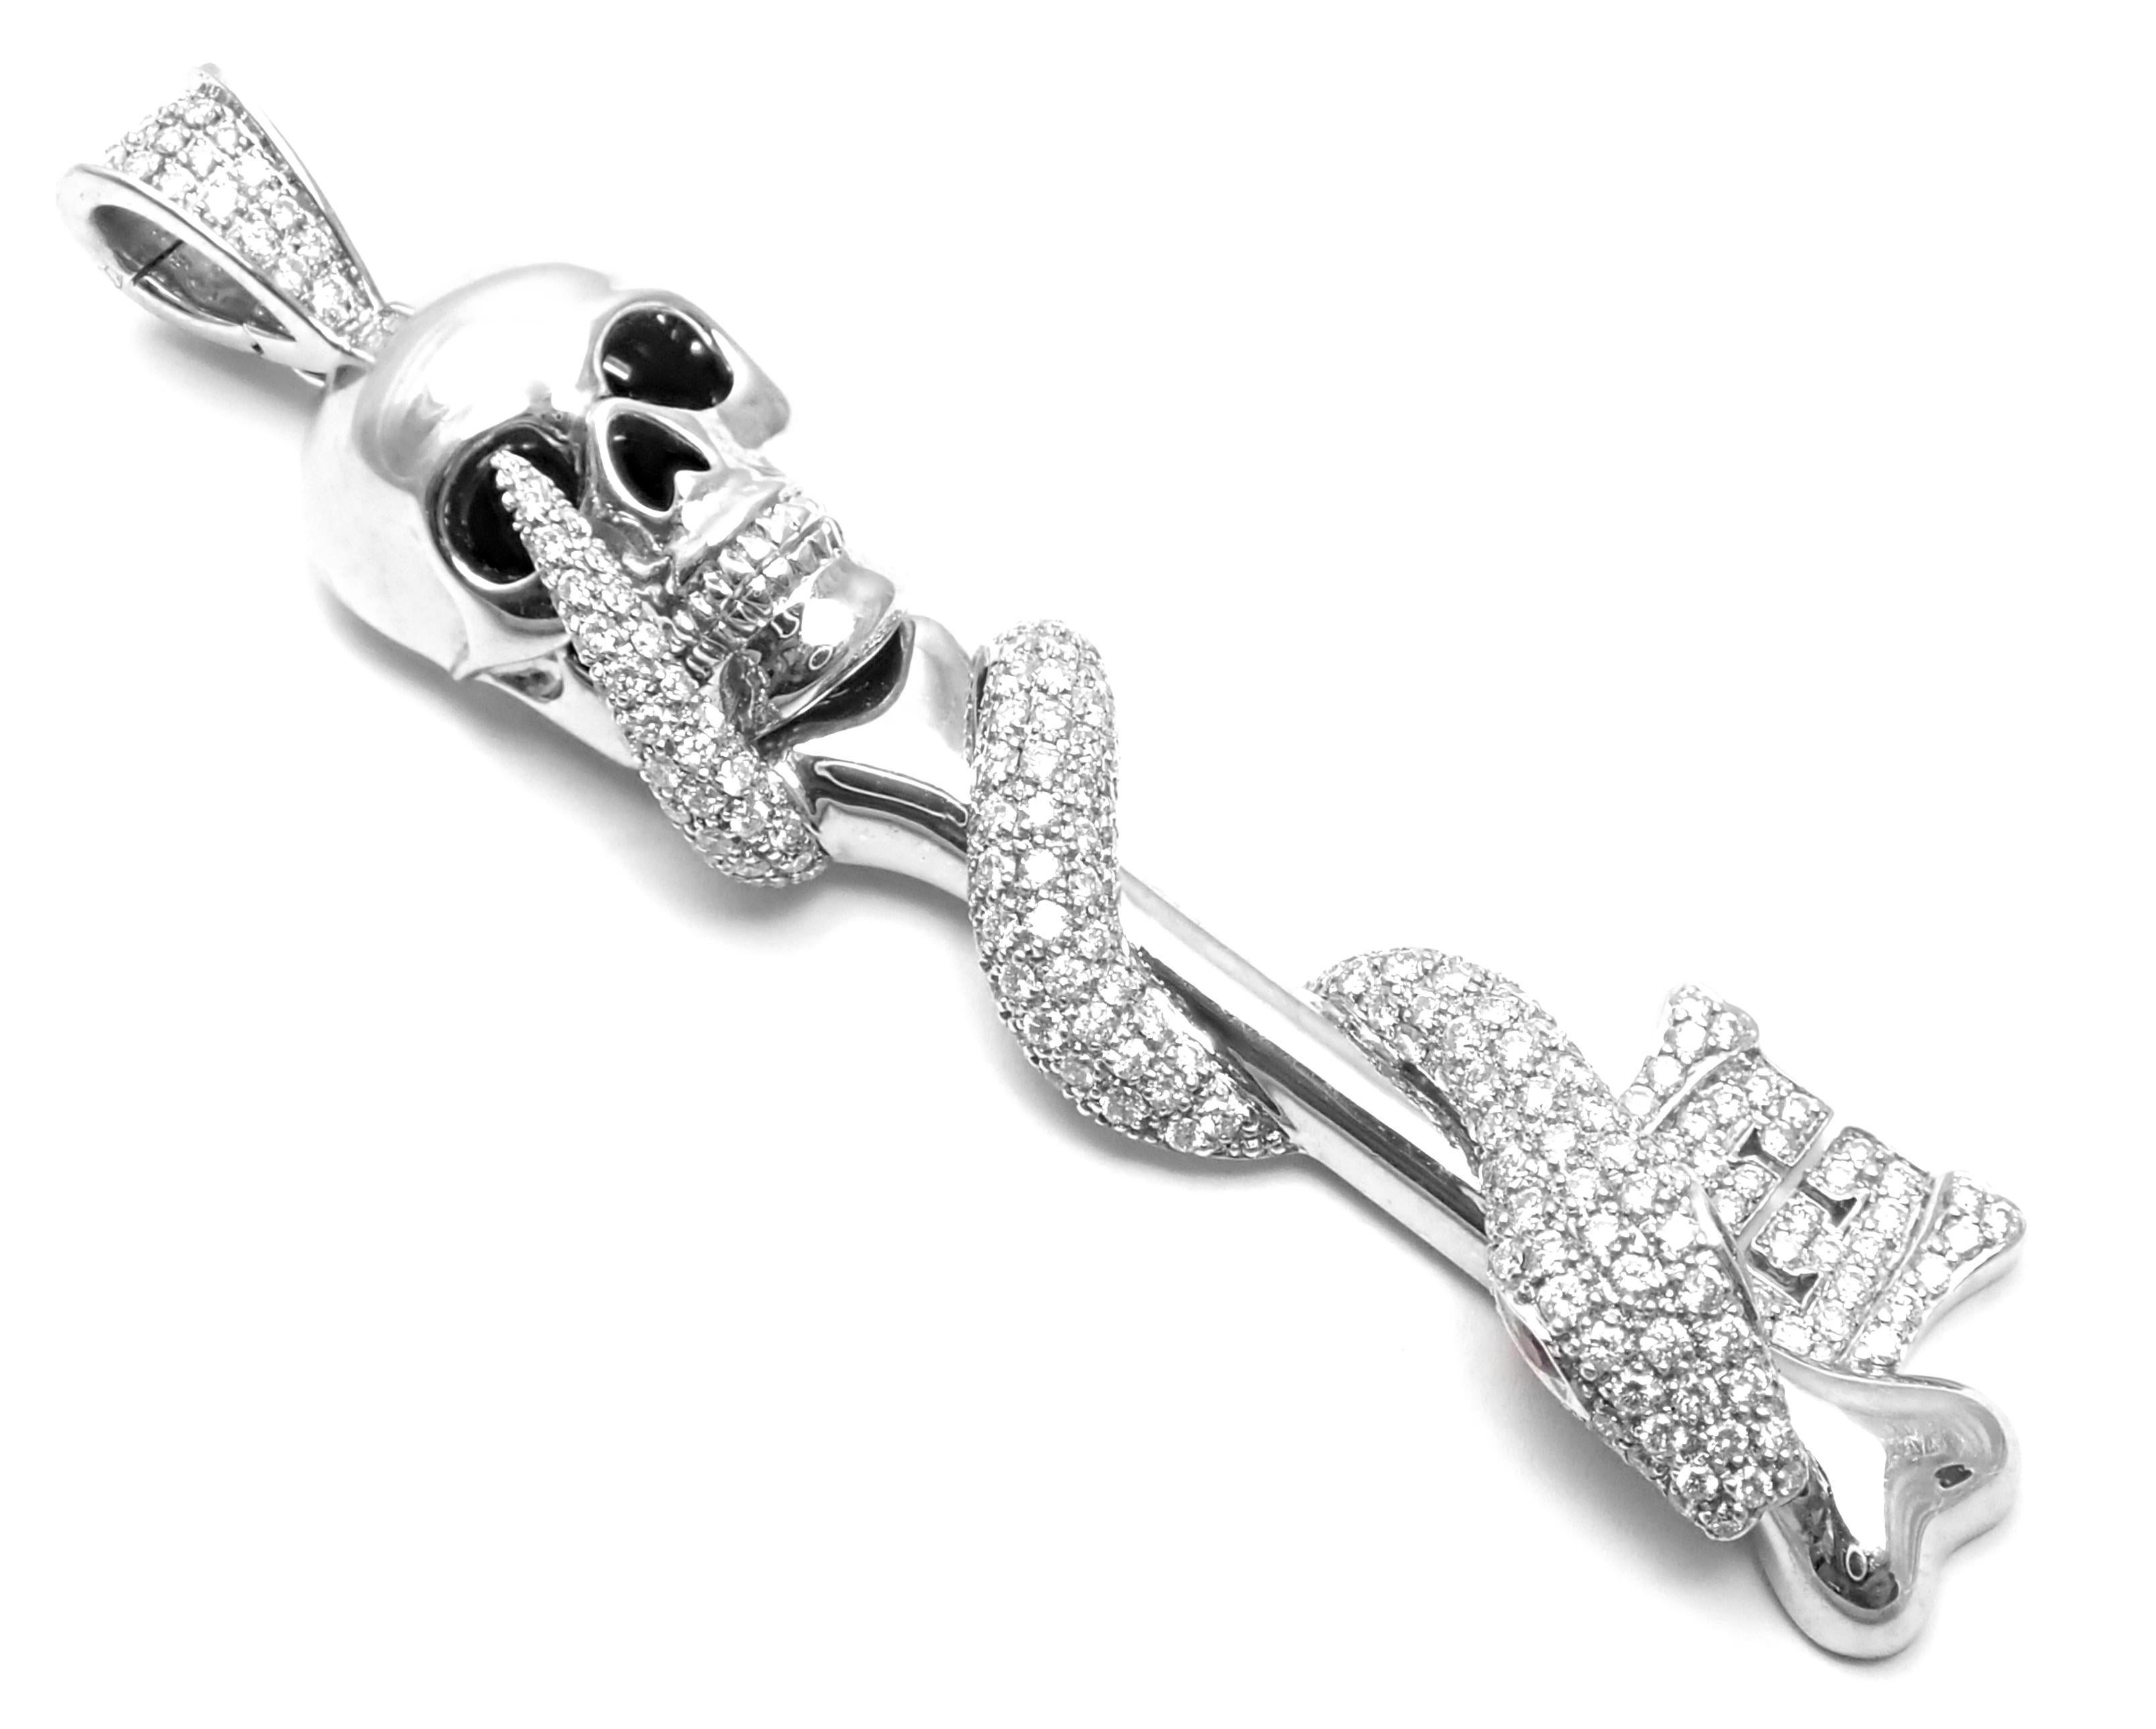 18k White Gold Diamond Rubies Large Skeleton Key Pendant by Theo Fennell. 
With Round brilliant cut diamonds VS1 clarity, G color
2 round rubies in the eyes
Details: 
Weight: 20.6 grams
Measurements: 2 3/4